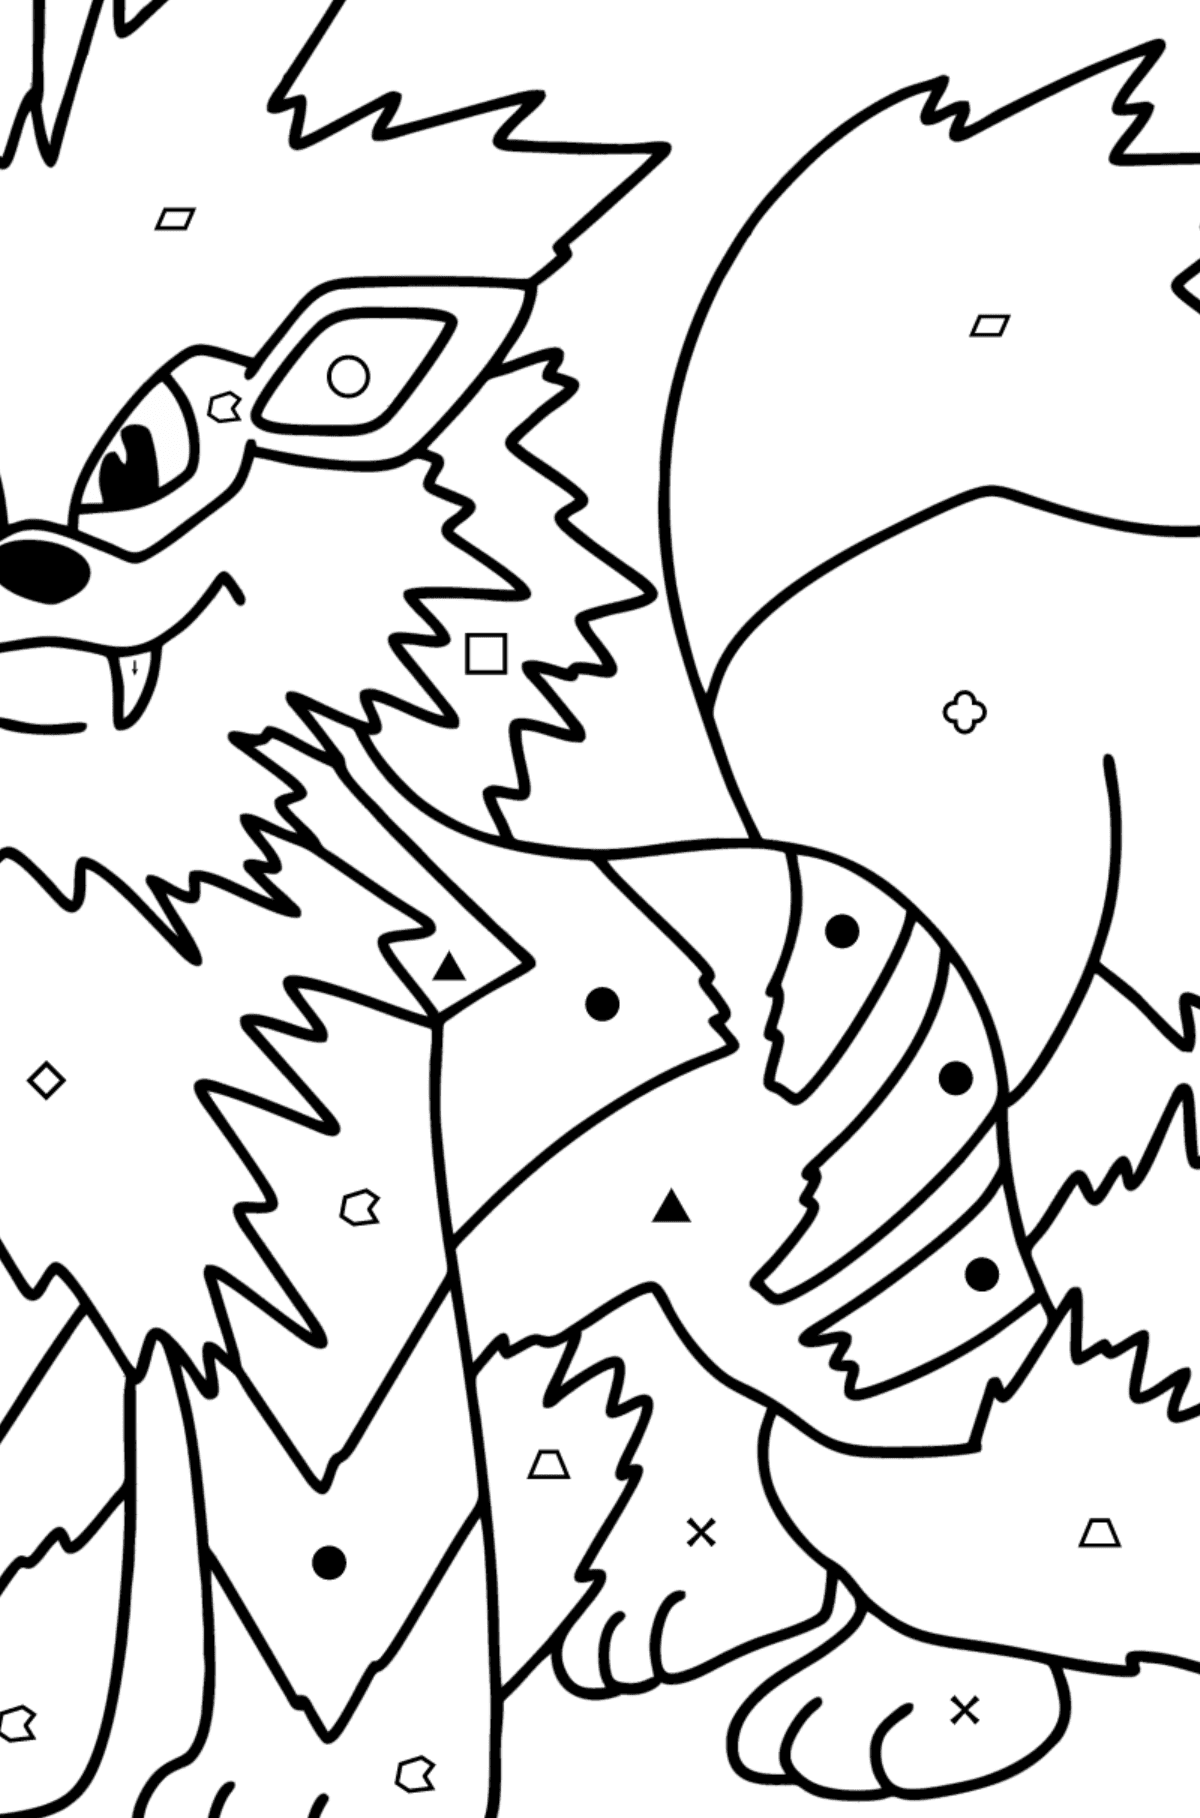 Pokémon Go Arcanine coloring page - Coloring by Symbols and Geometric Shapes for Kids